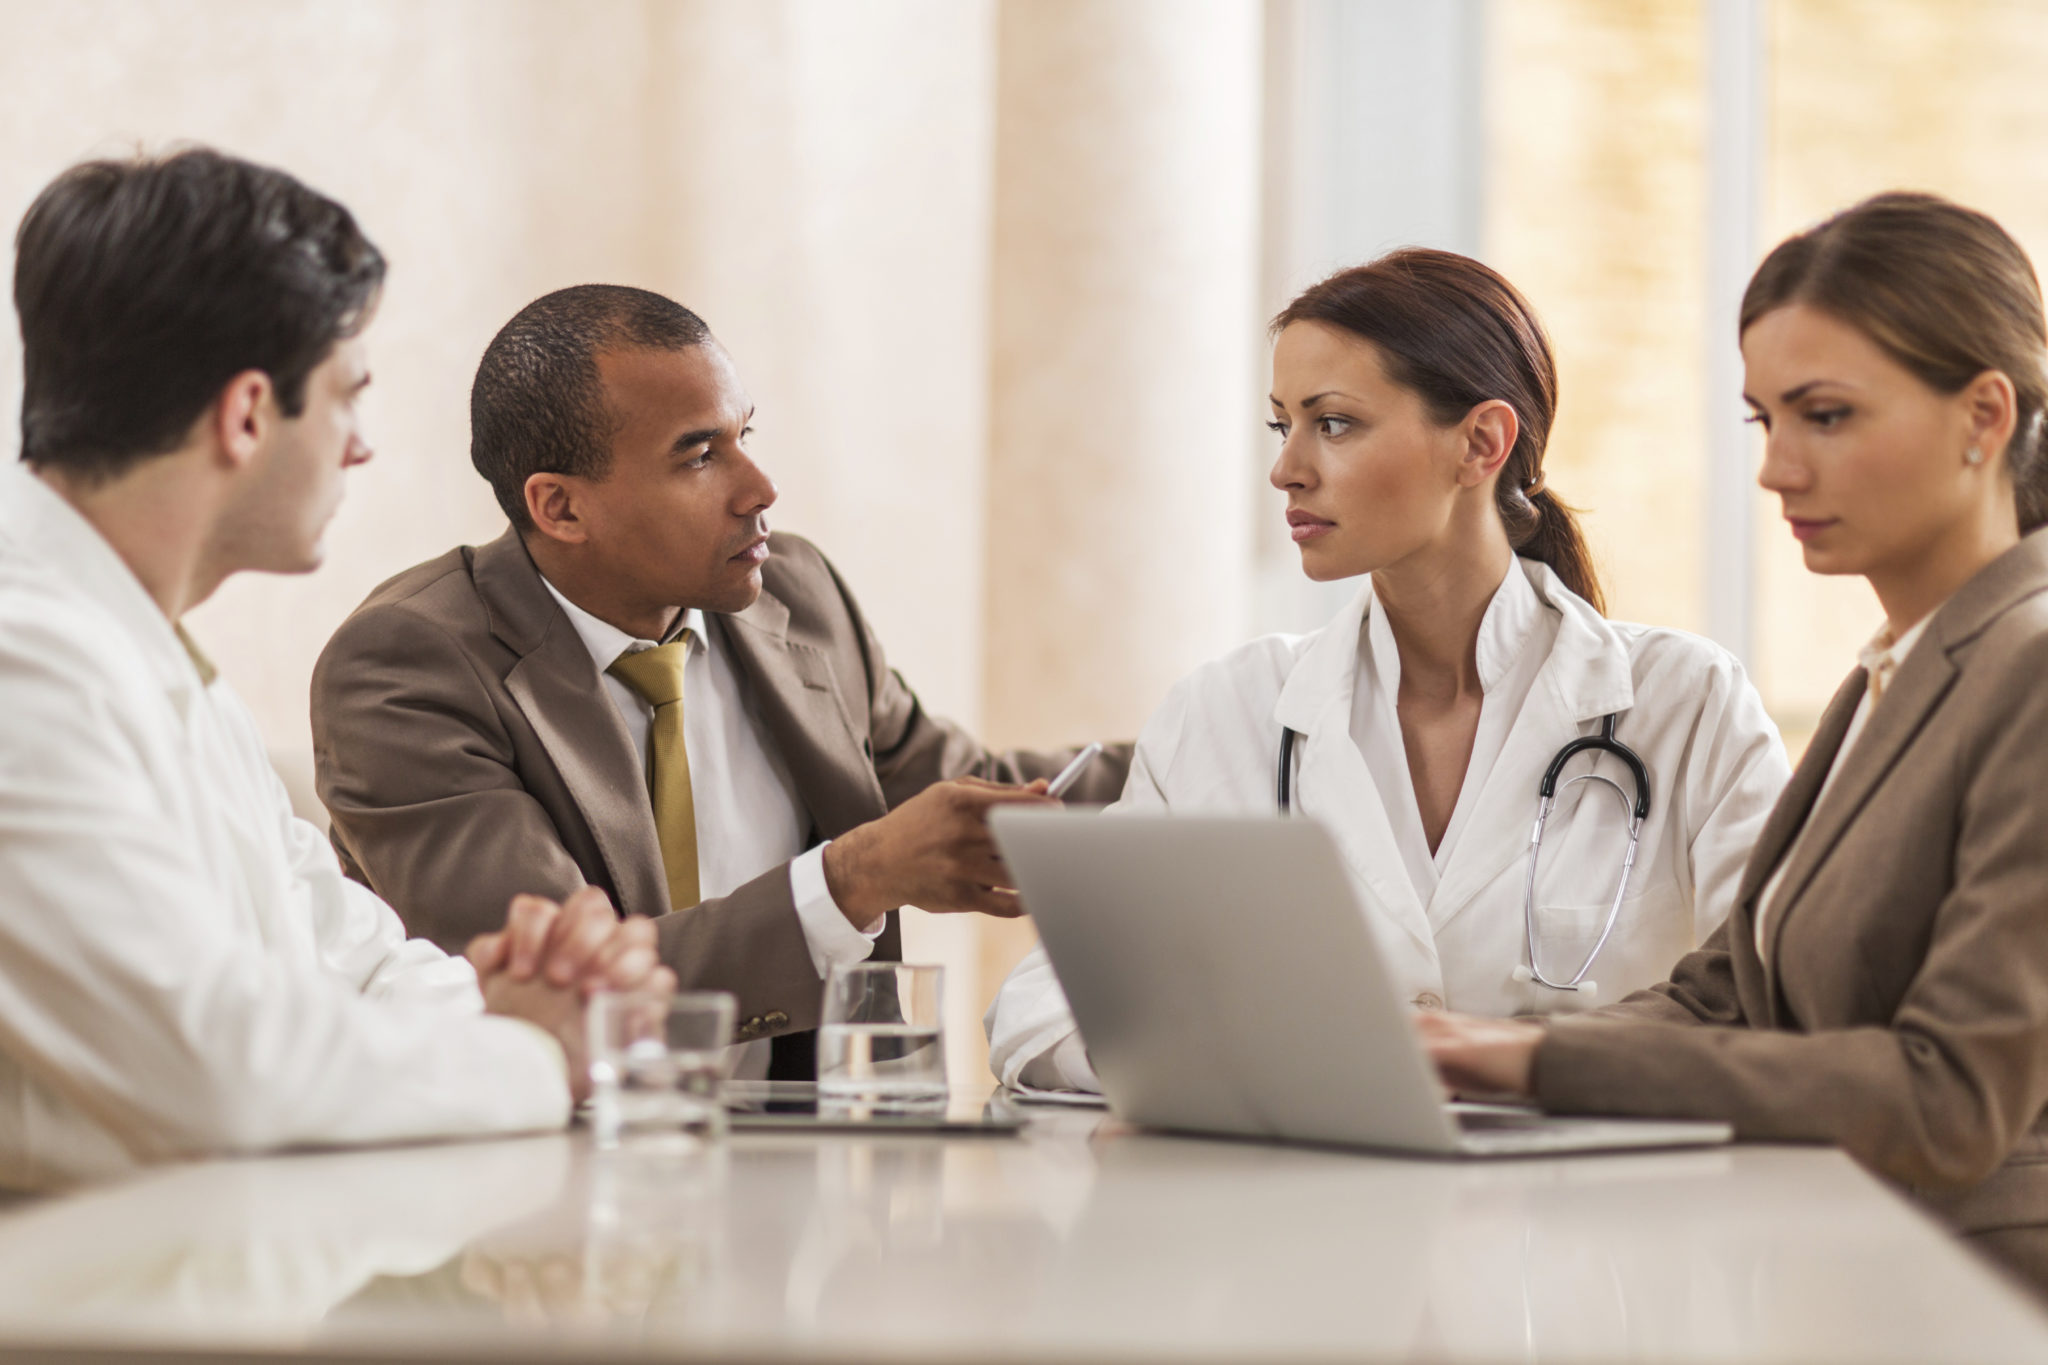 6 Reasons for Upgrading Your Employed Physician Network Leadership